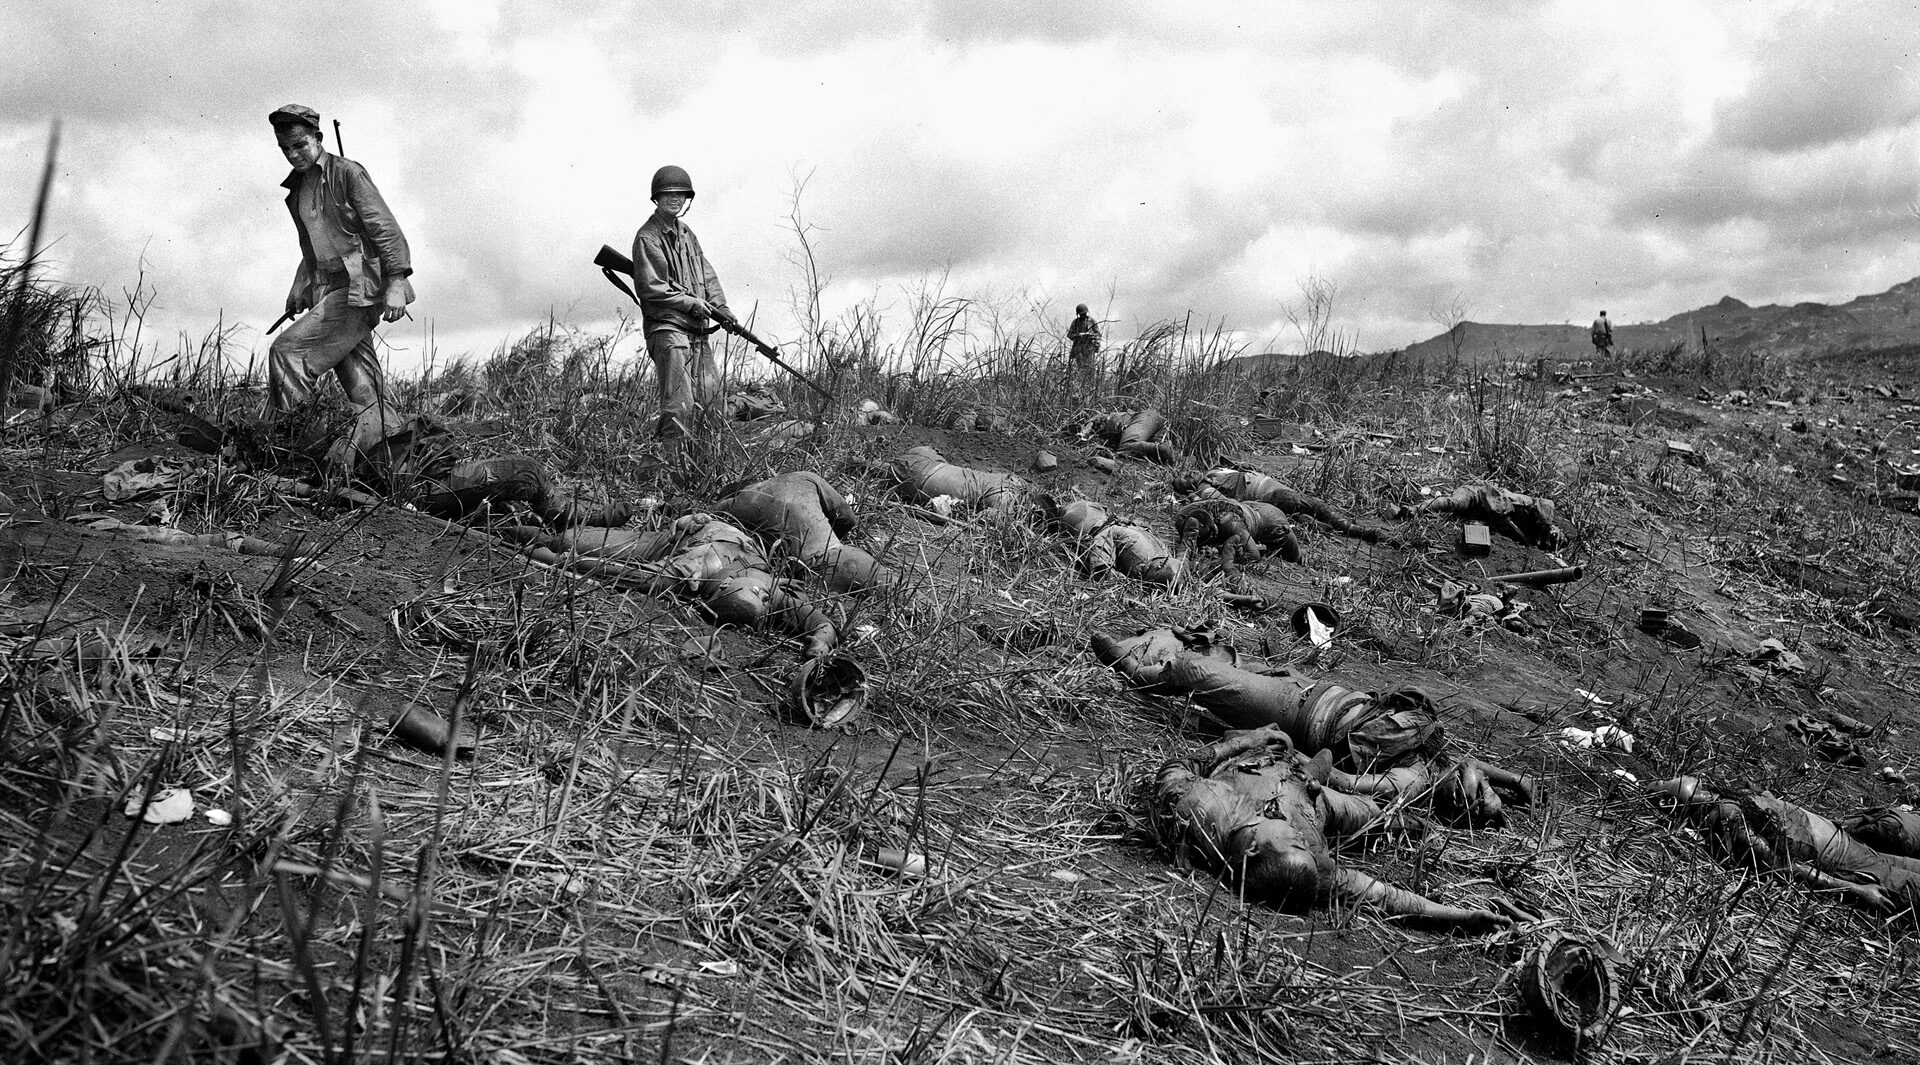 American soldiers survey the jumble of Japanese corpses left following a futile banzai charge on the island of Guam. The Marines and Army soldiers faced nightime attacks that ultimately resulted in the slaughter of large numbers of brave Japanese soldiers. 